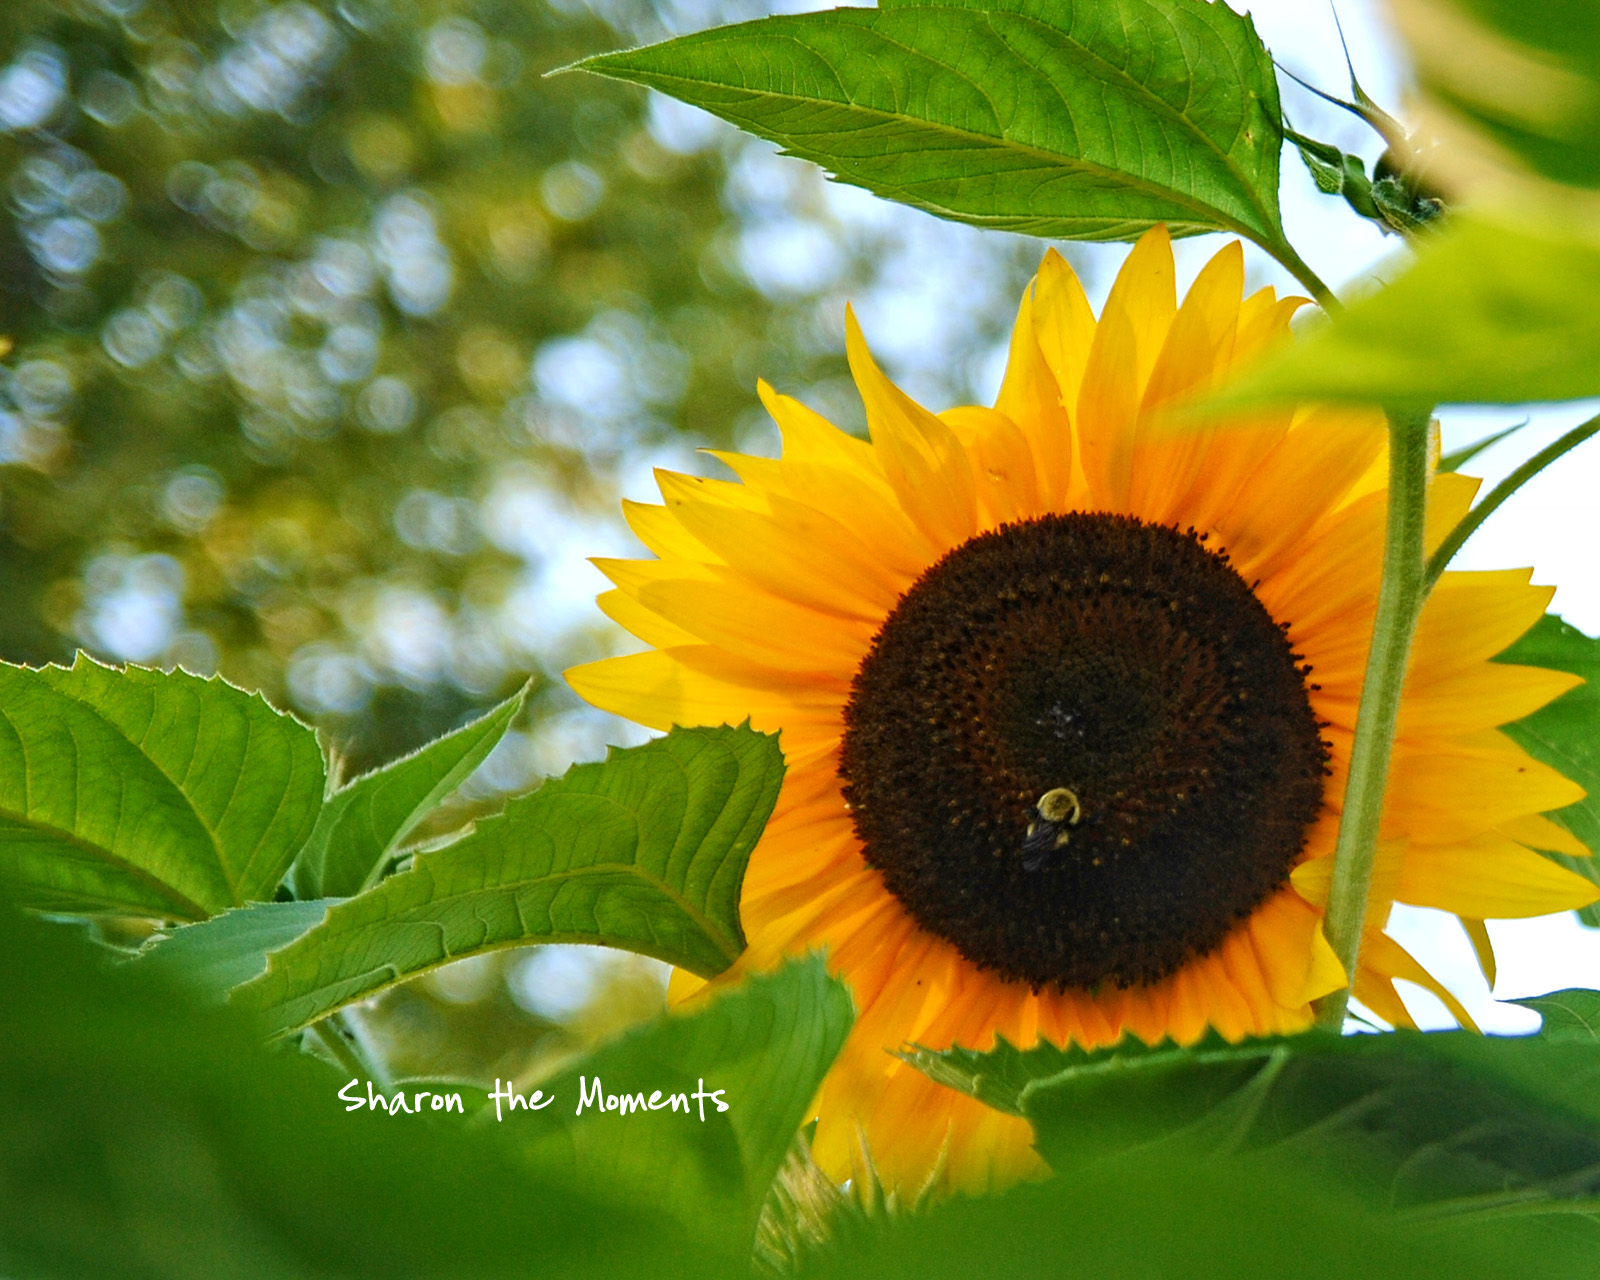 Favorite Photo Friday Summer Sunflowers|Sharon the Moments blog